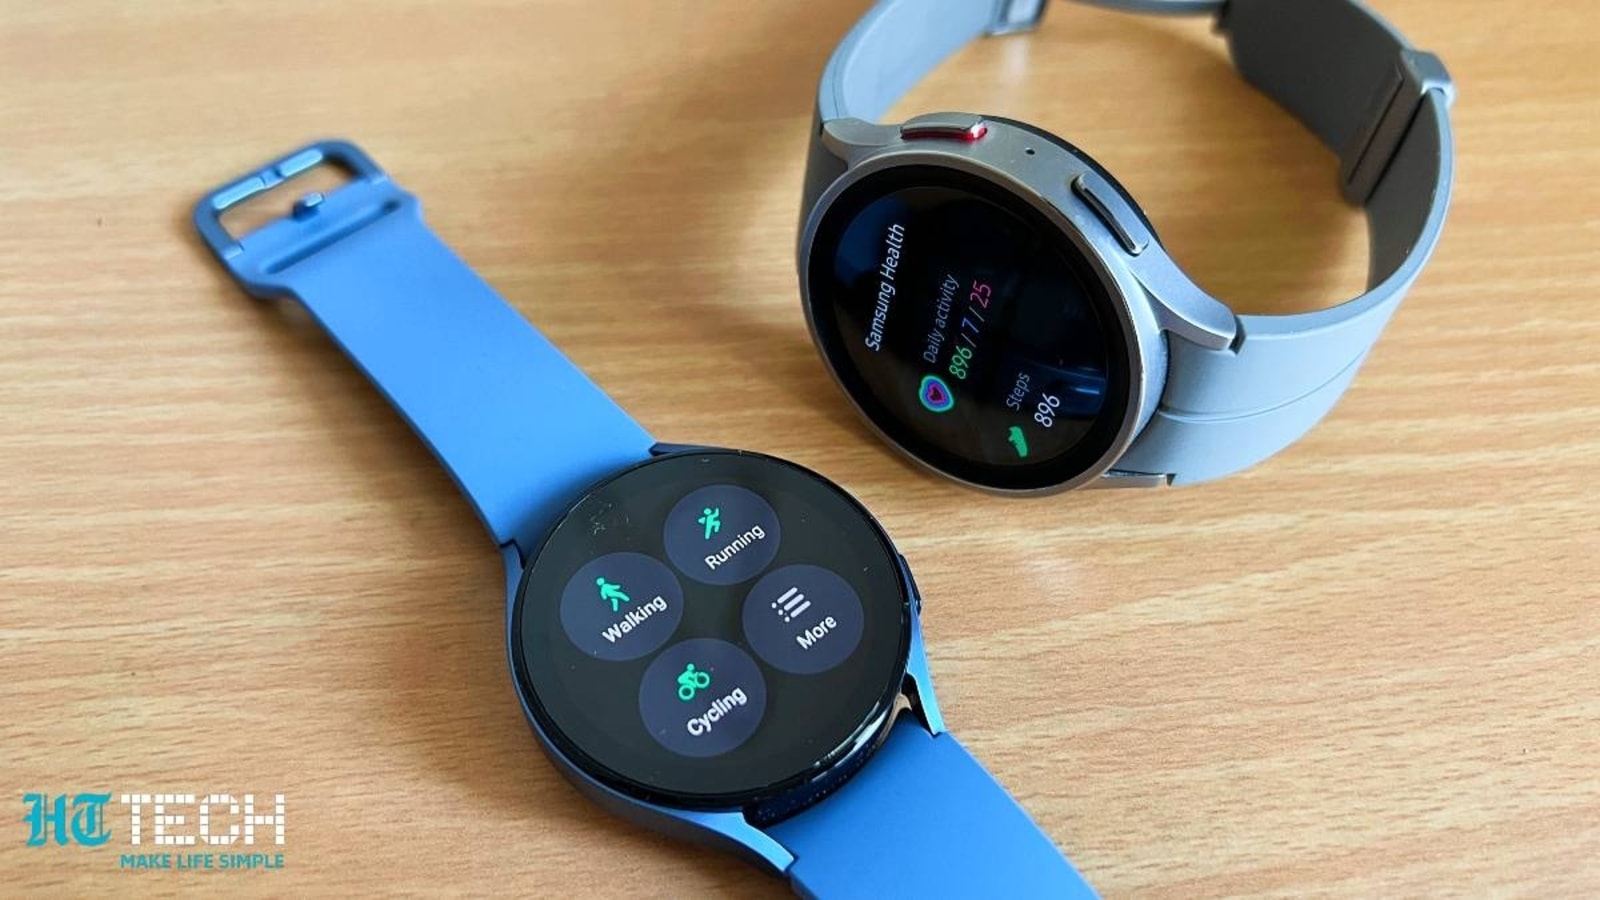 Samsung's Next Smartwatches Will Be All About Sleep and Health Tracking -  CNET